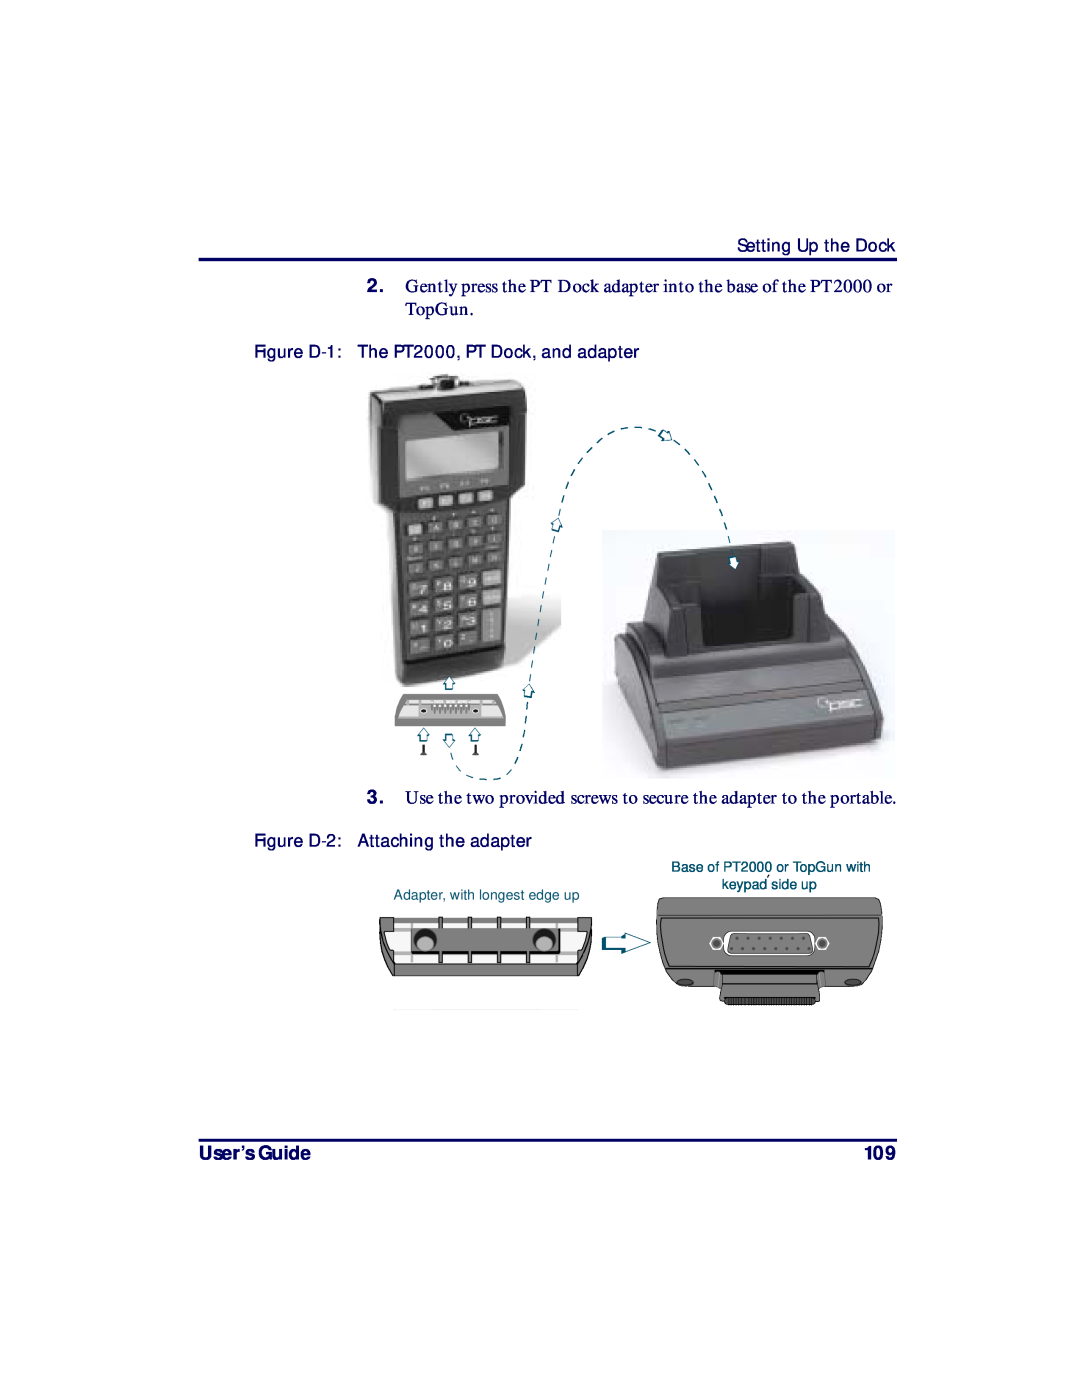 PSC User’s Guide, Setting Up the Dock, Figure D-1 The PT2000, PT Dock, and adapter, Figure D-2 Attaching the adapter 